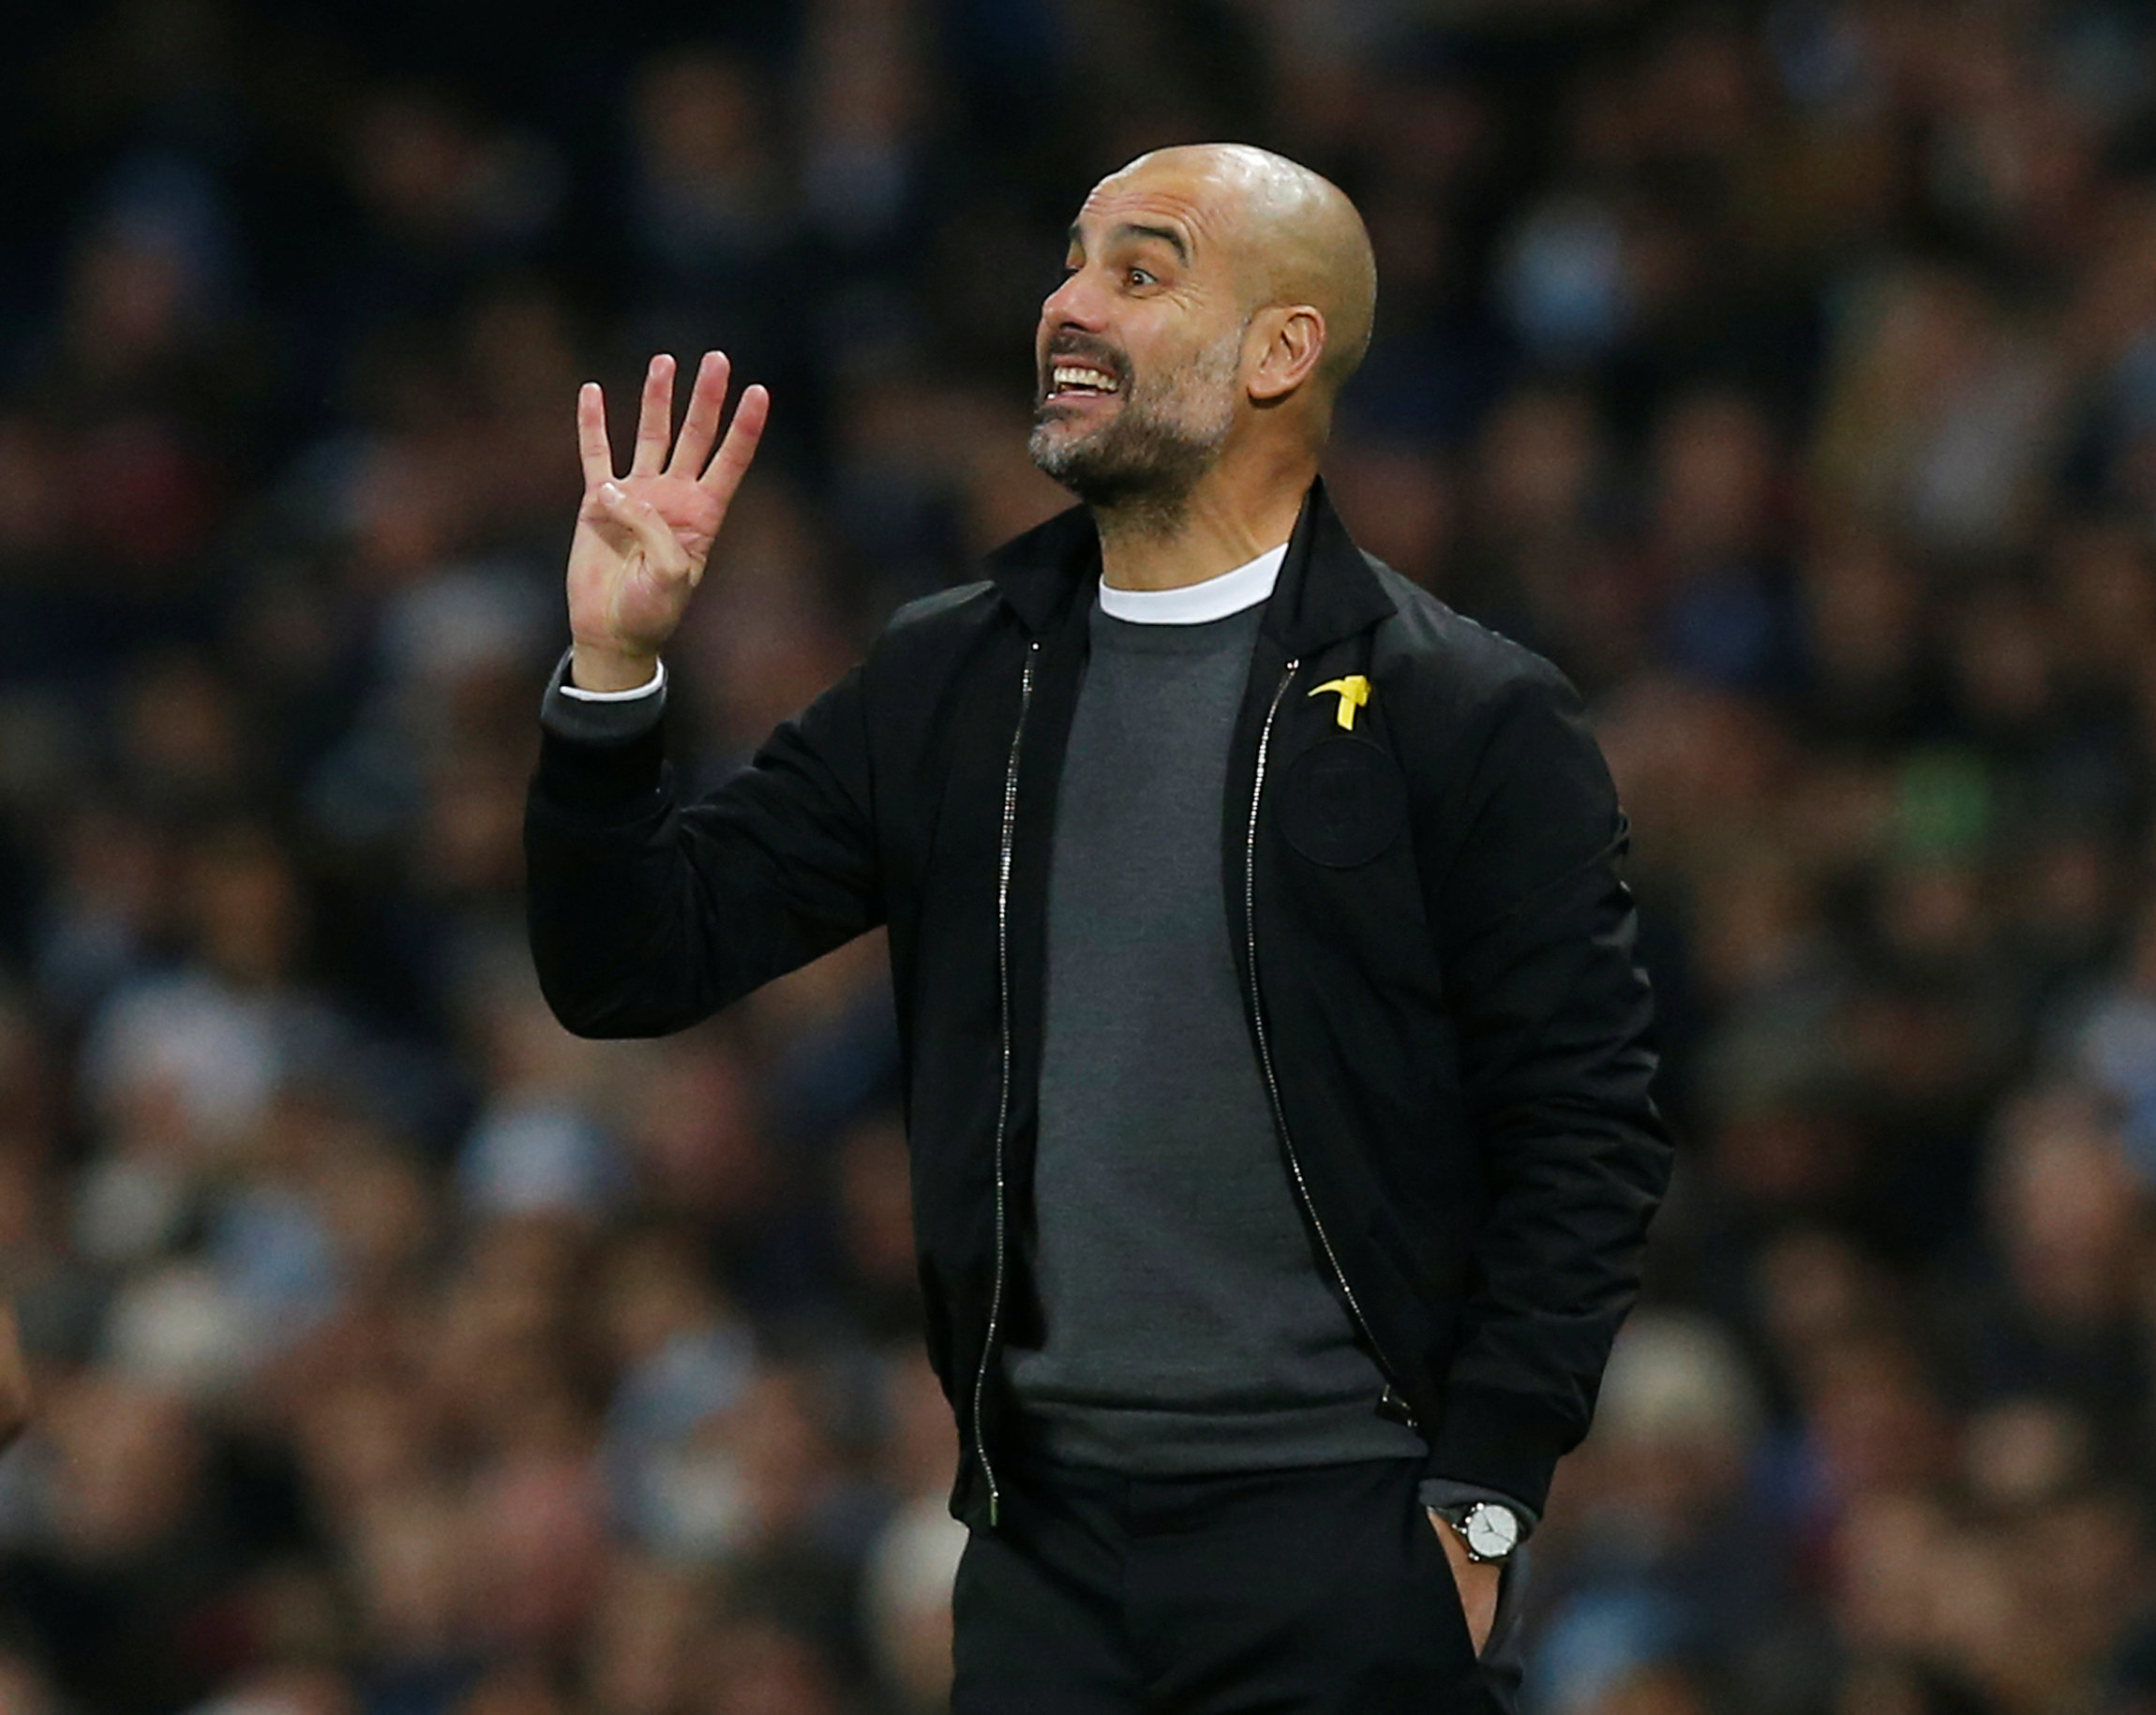 Football: Guardiola spells out how City can get even better